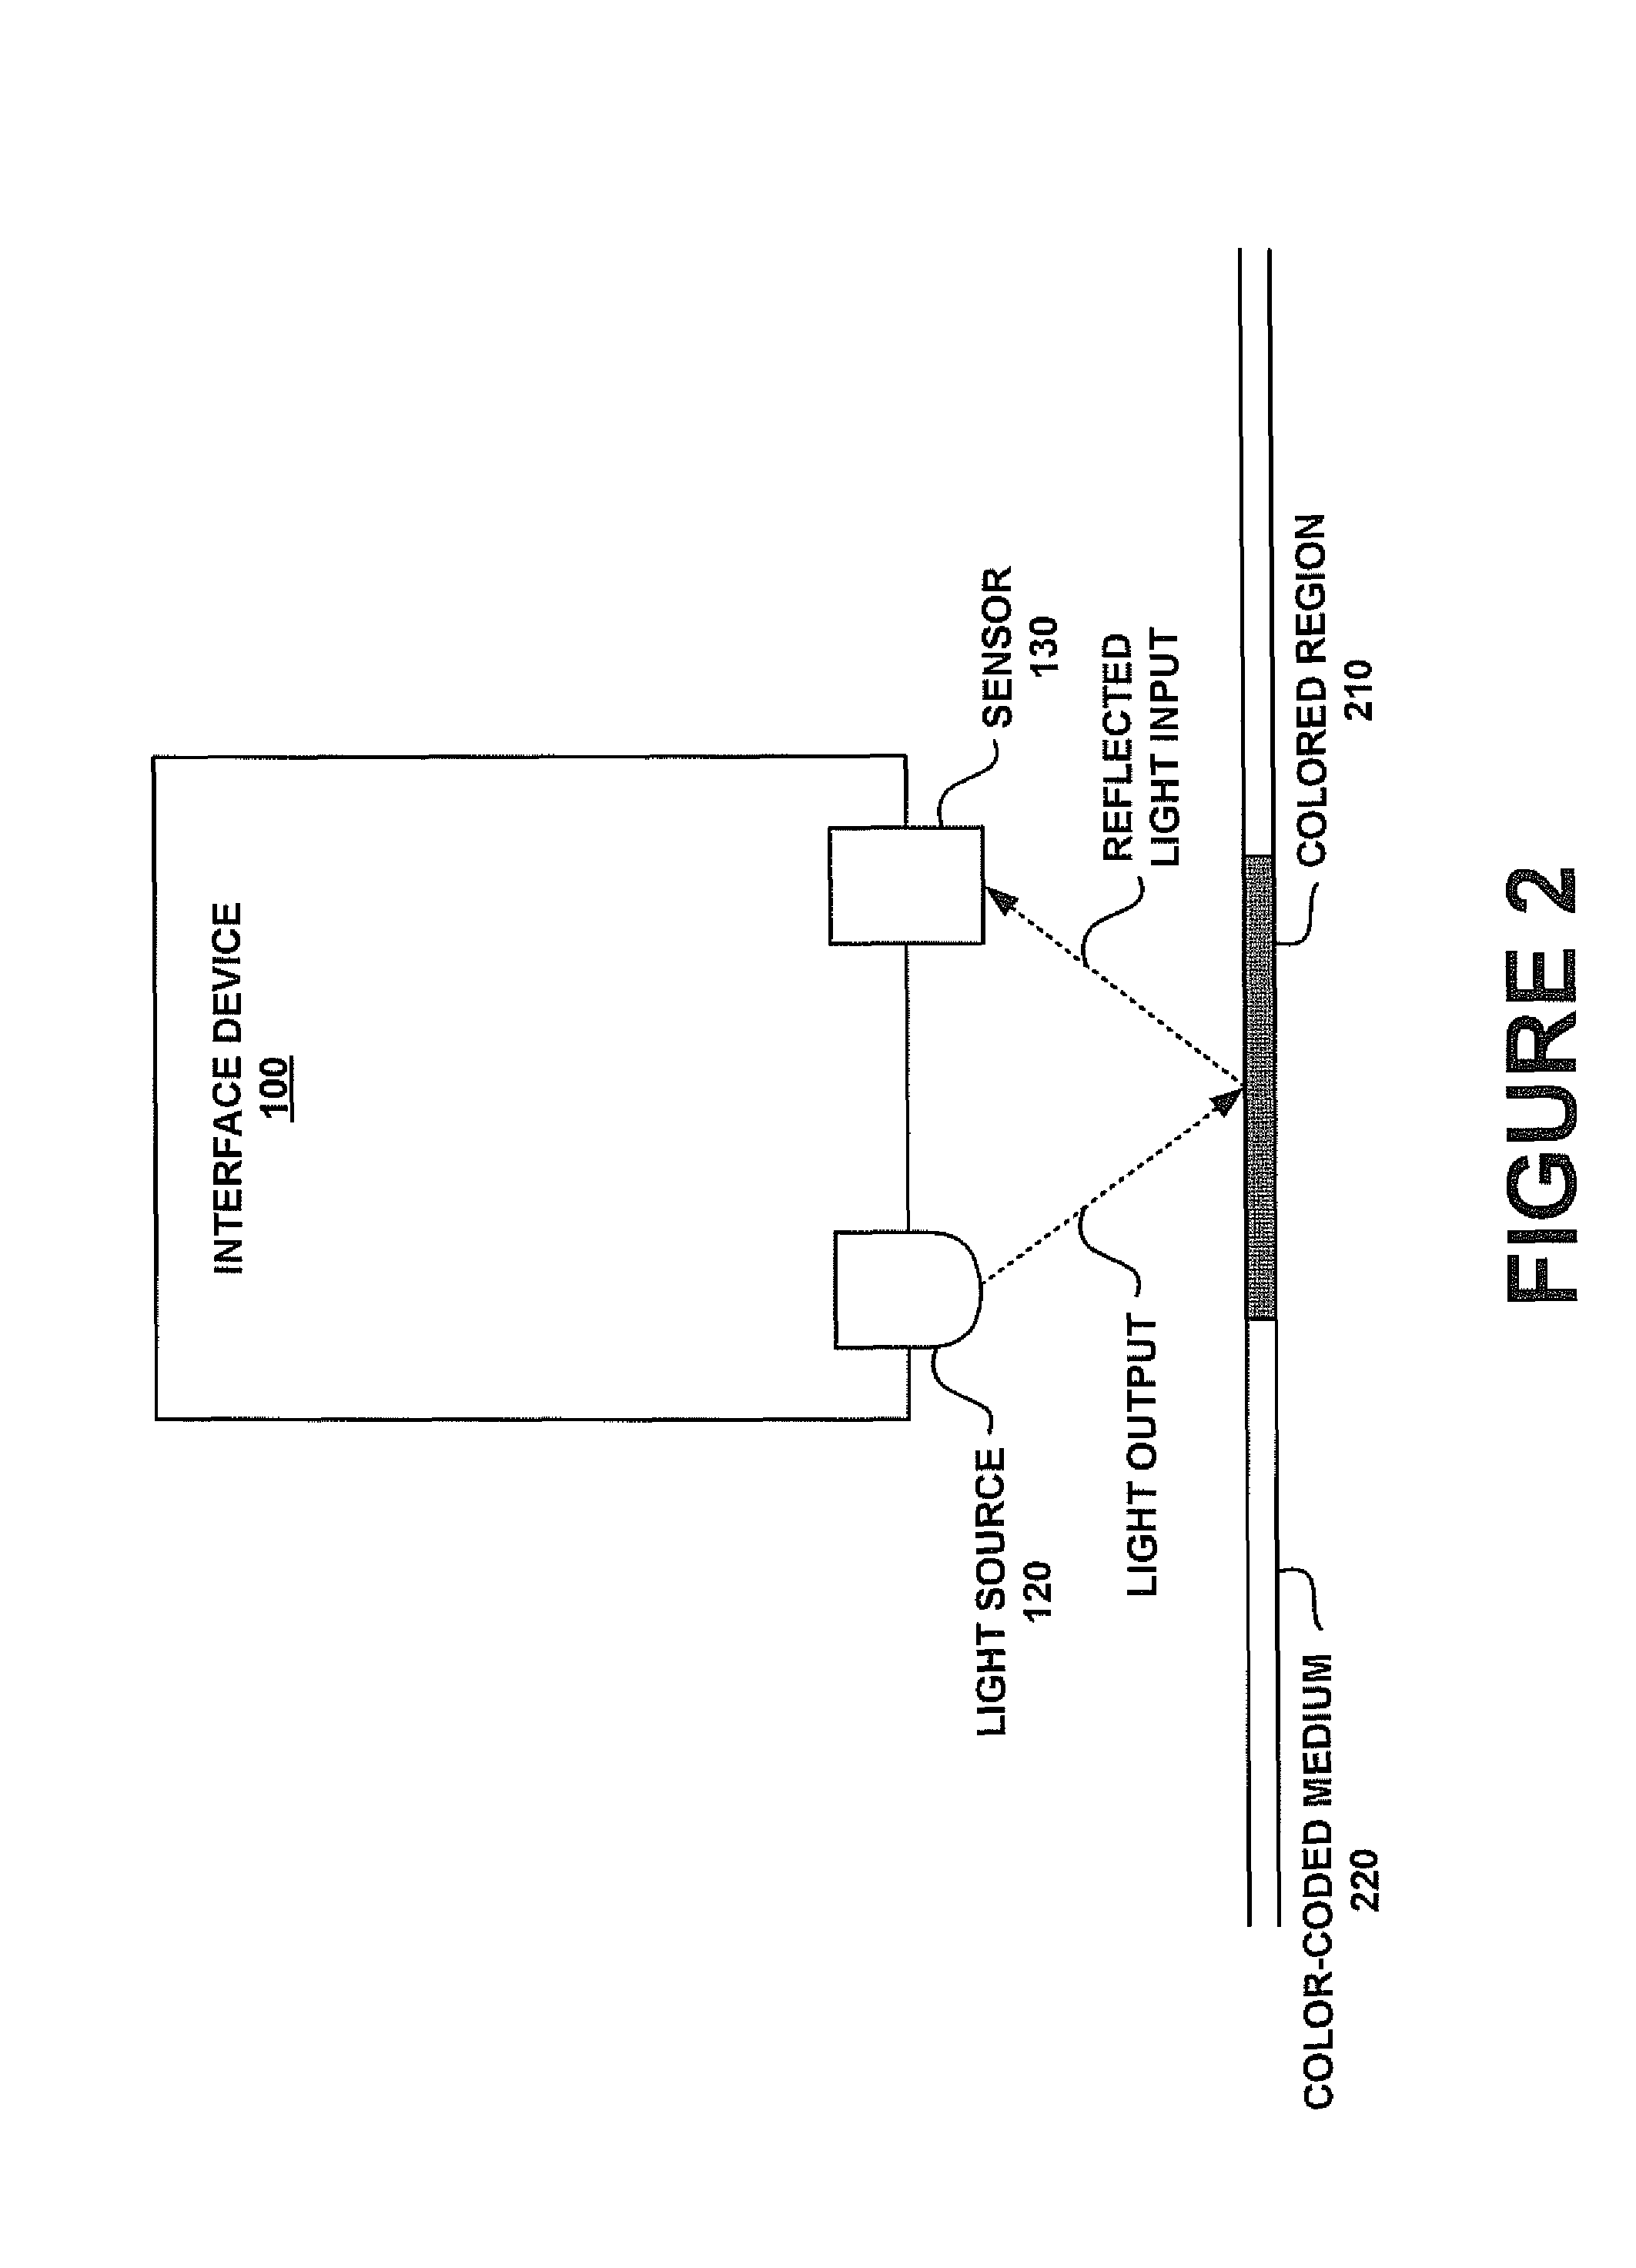 Peripheral interface device for color recognition